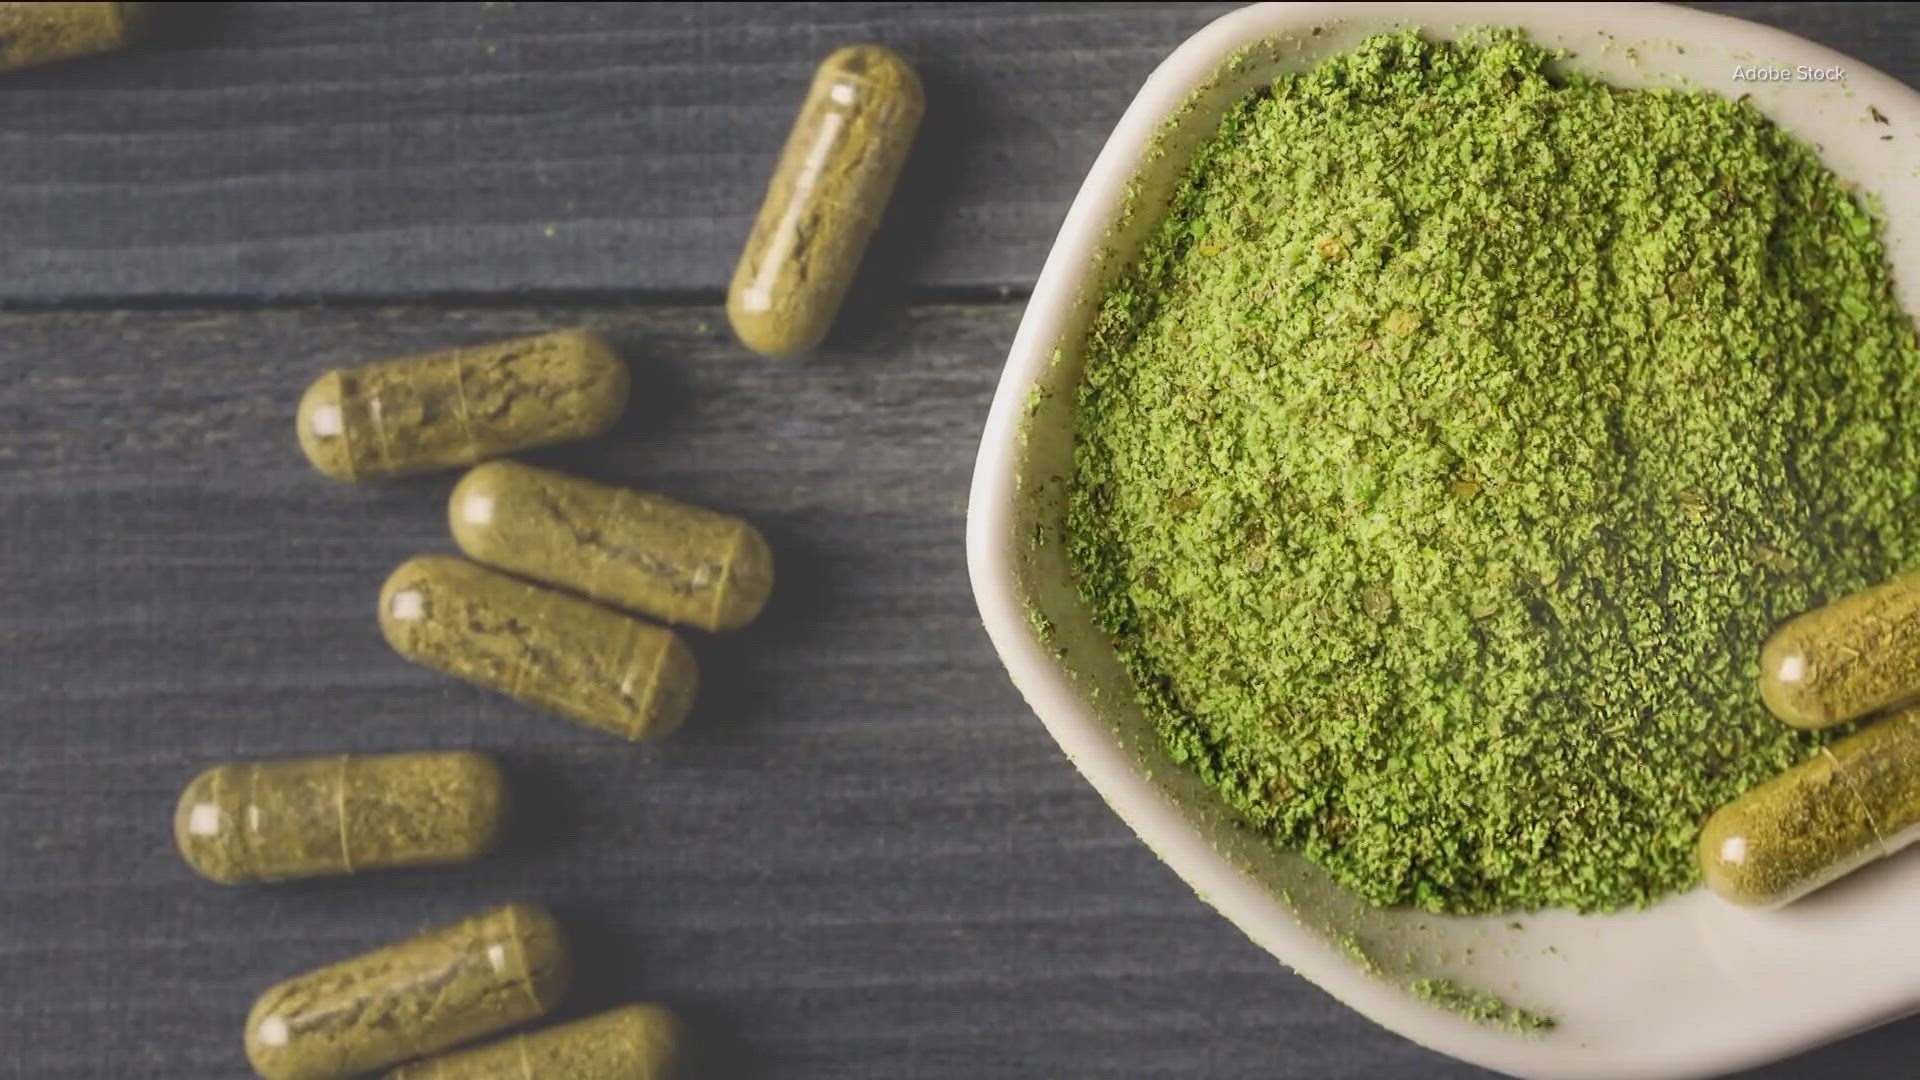 Green Thai Kratom: Nature’s Gift for Health and Wellbeing